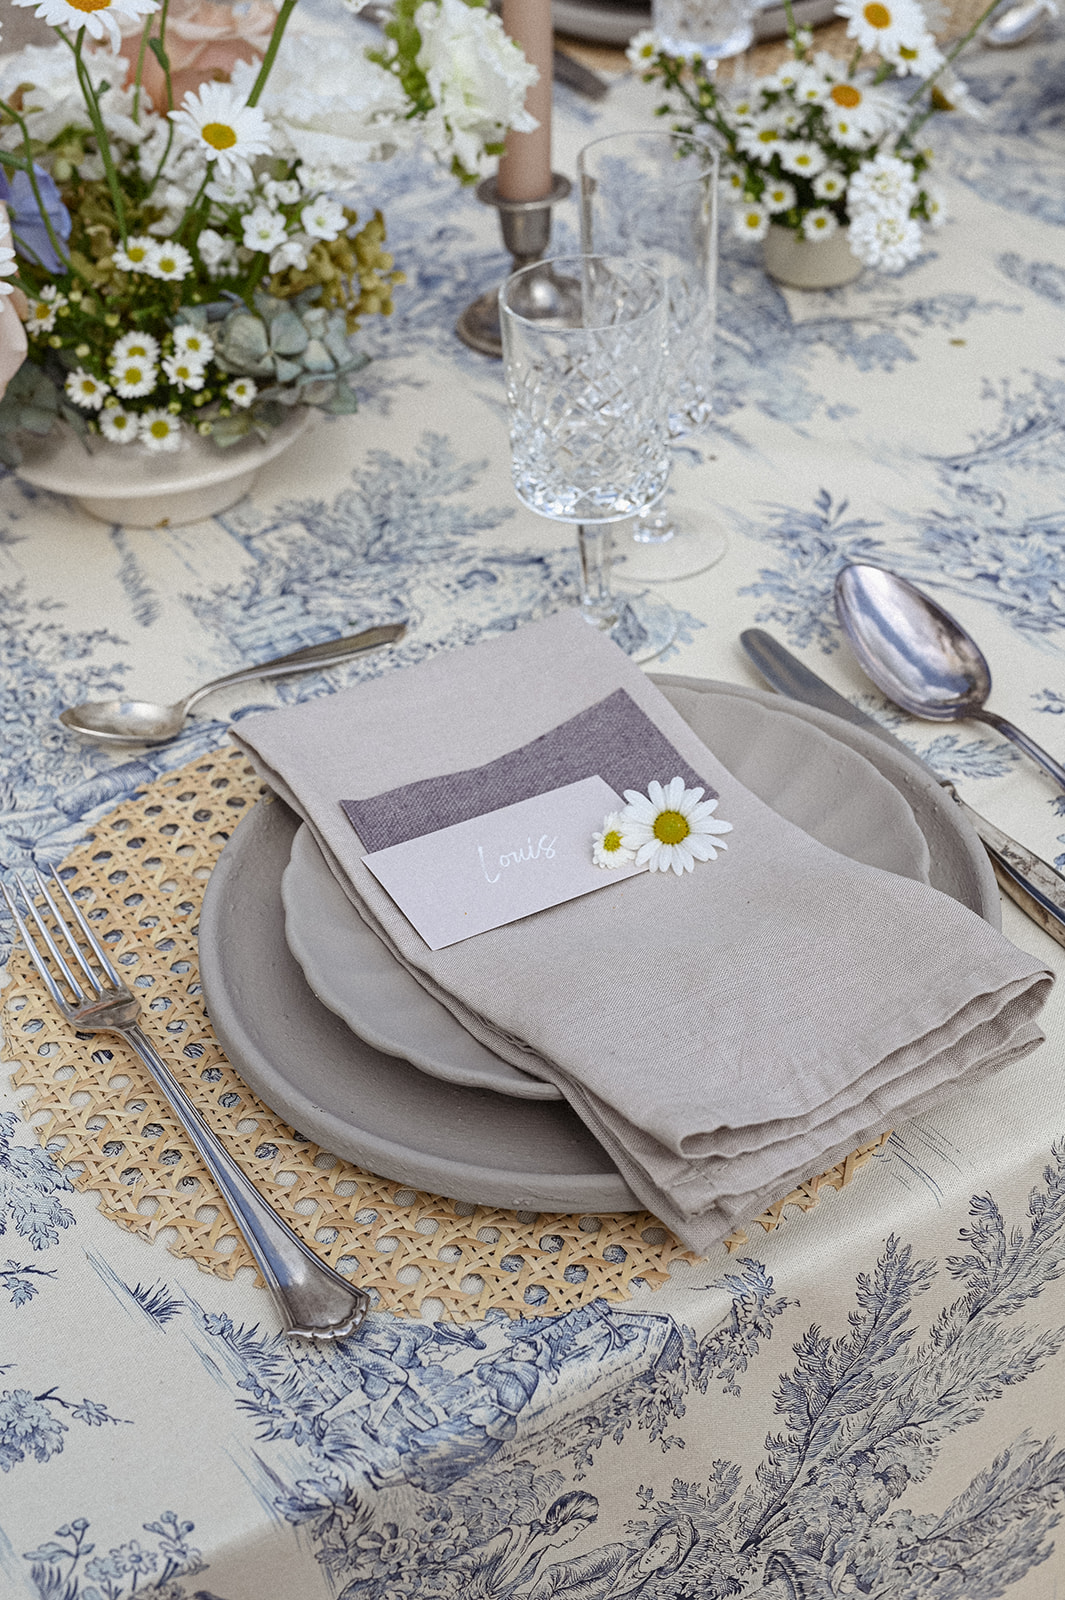 daisy-inspired wedding place settings